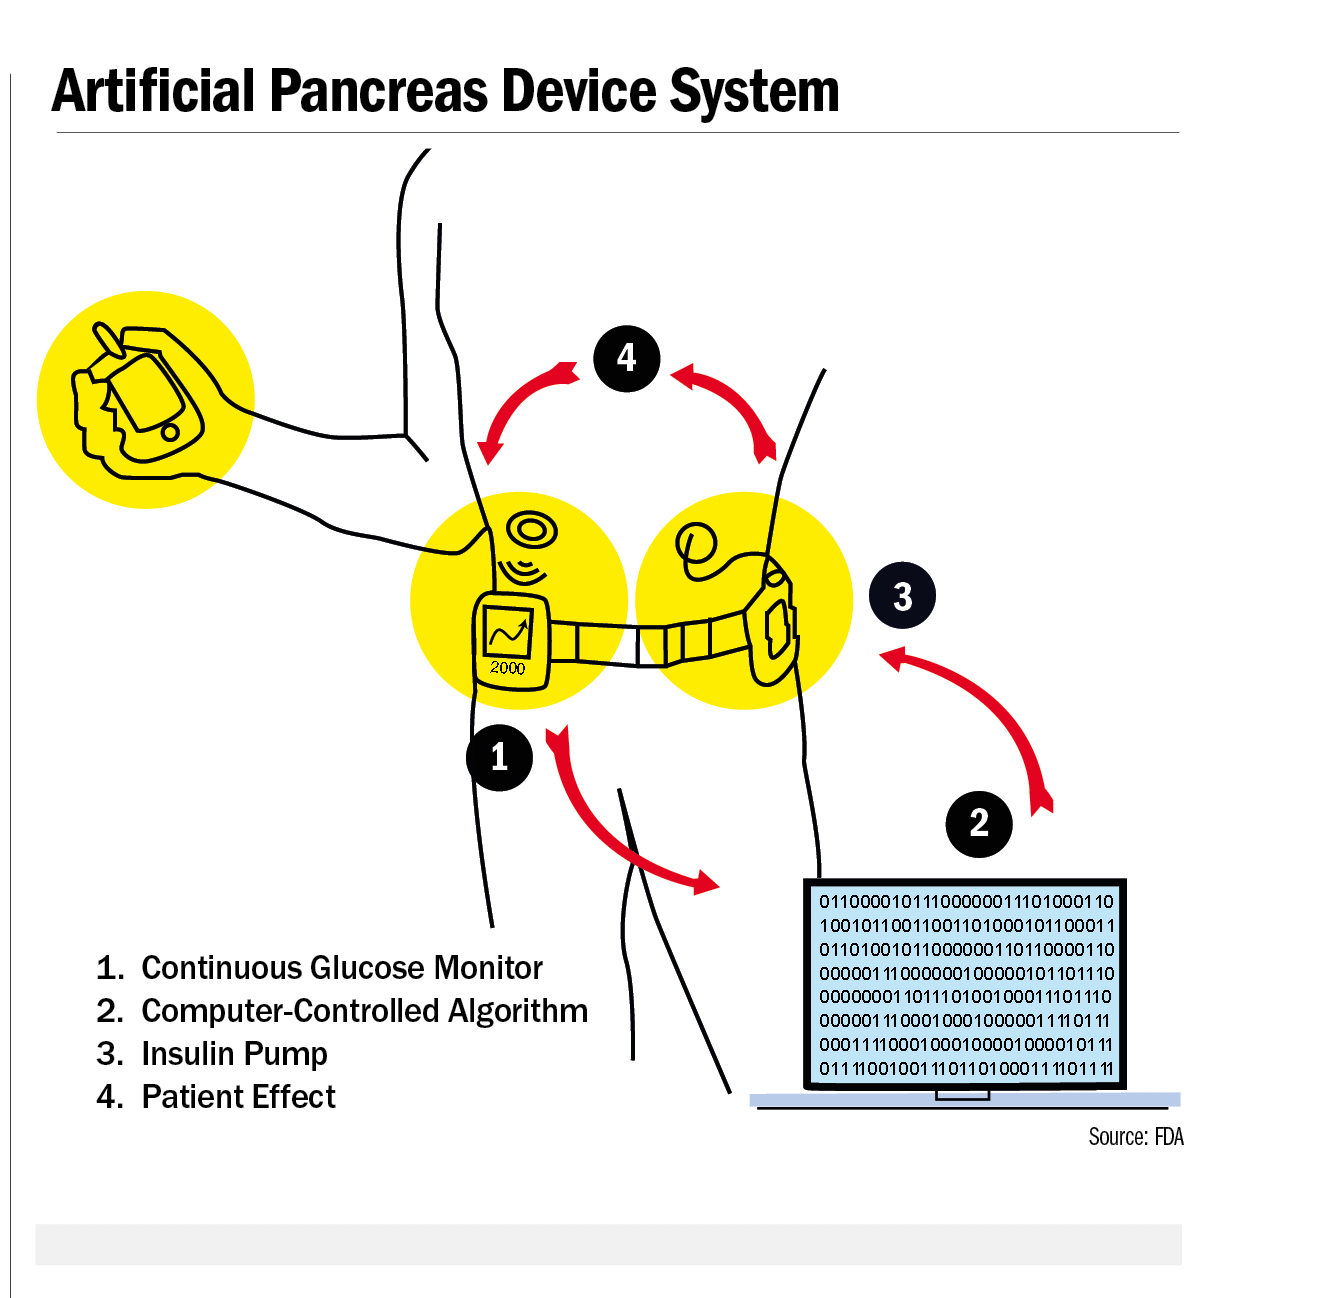 Artificial Pancreas Device System